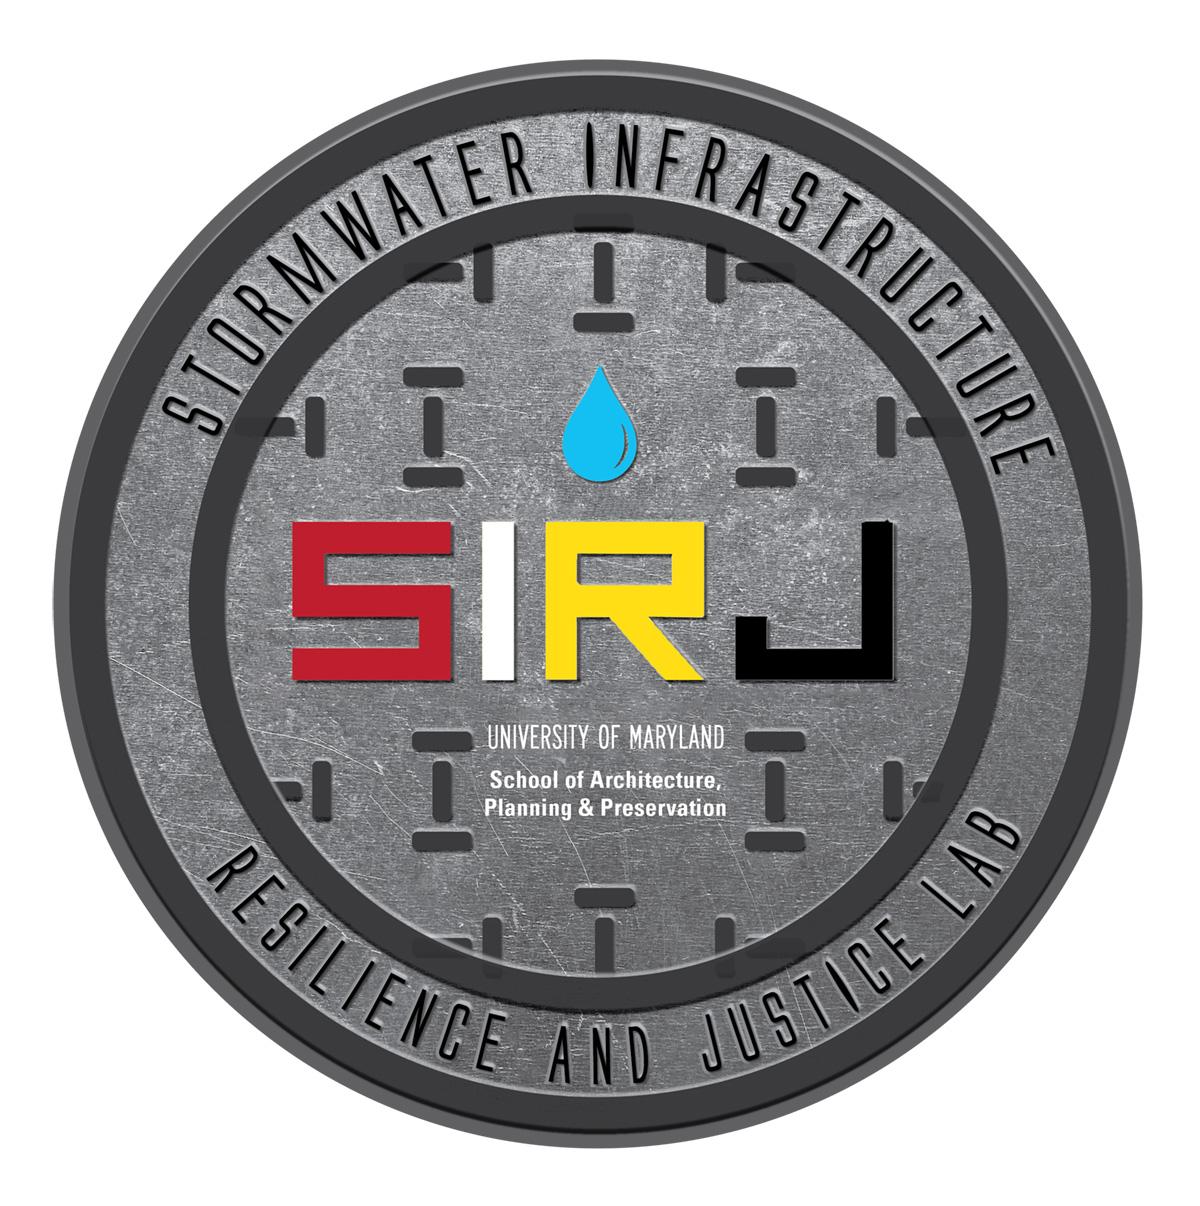 Stormwater Infrastructure Resilience and Justice Lab logo